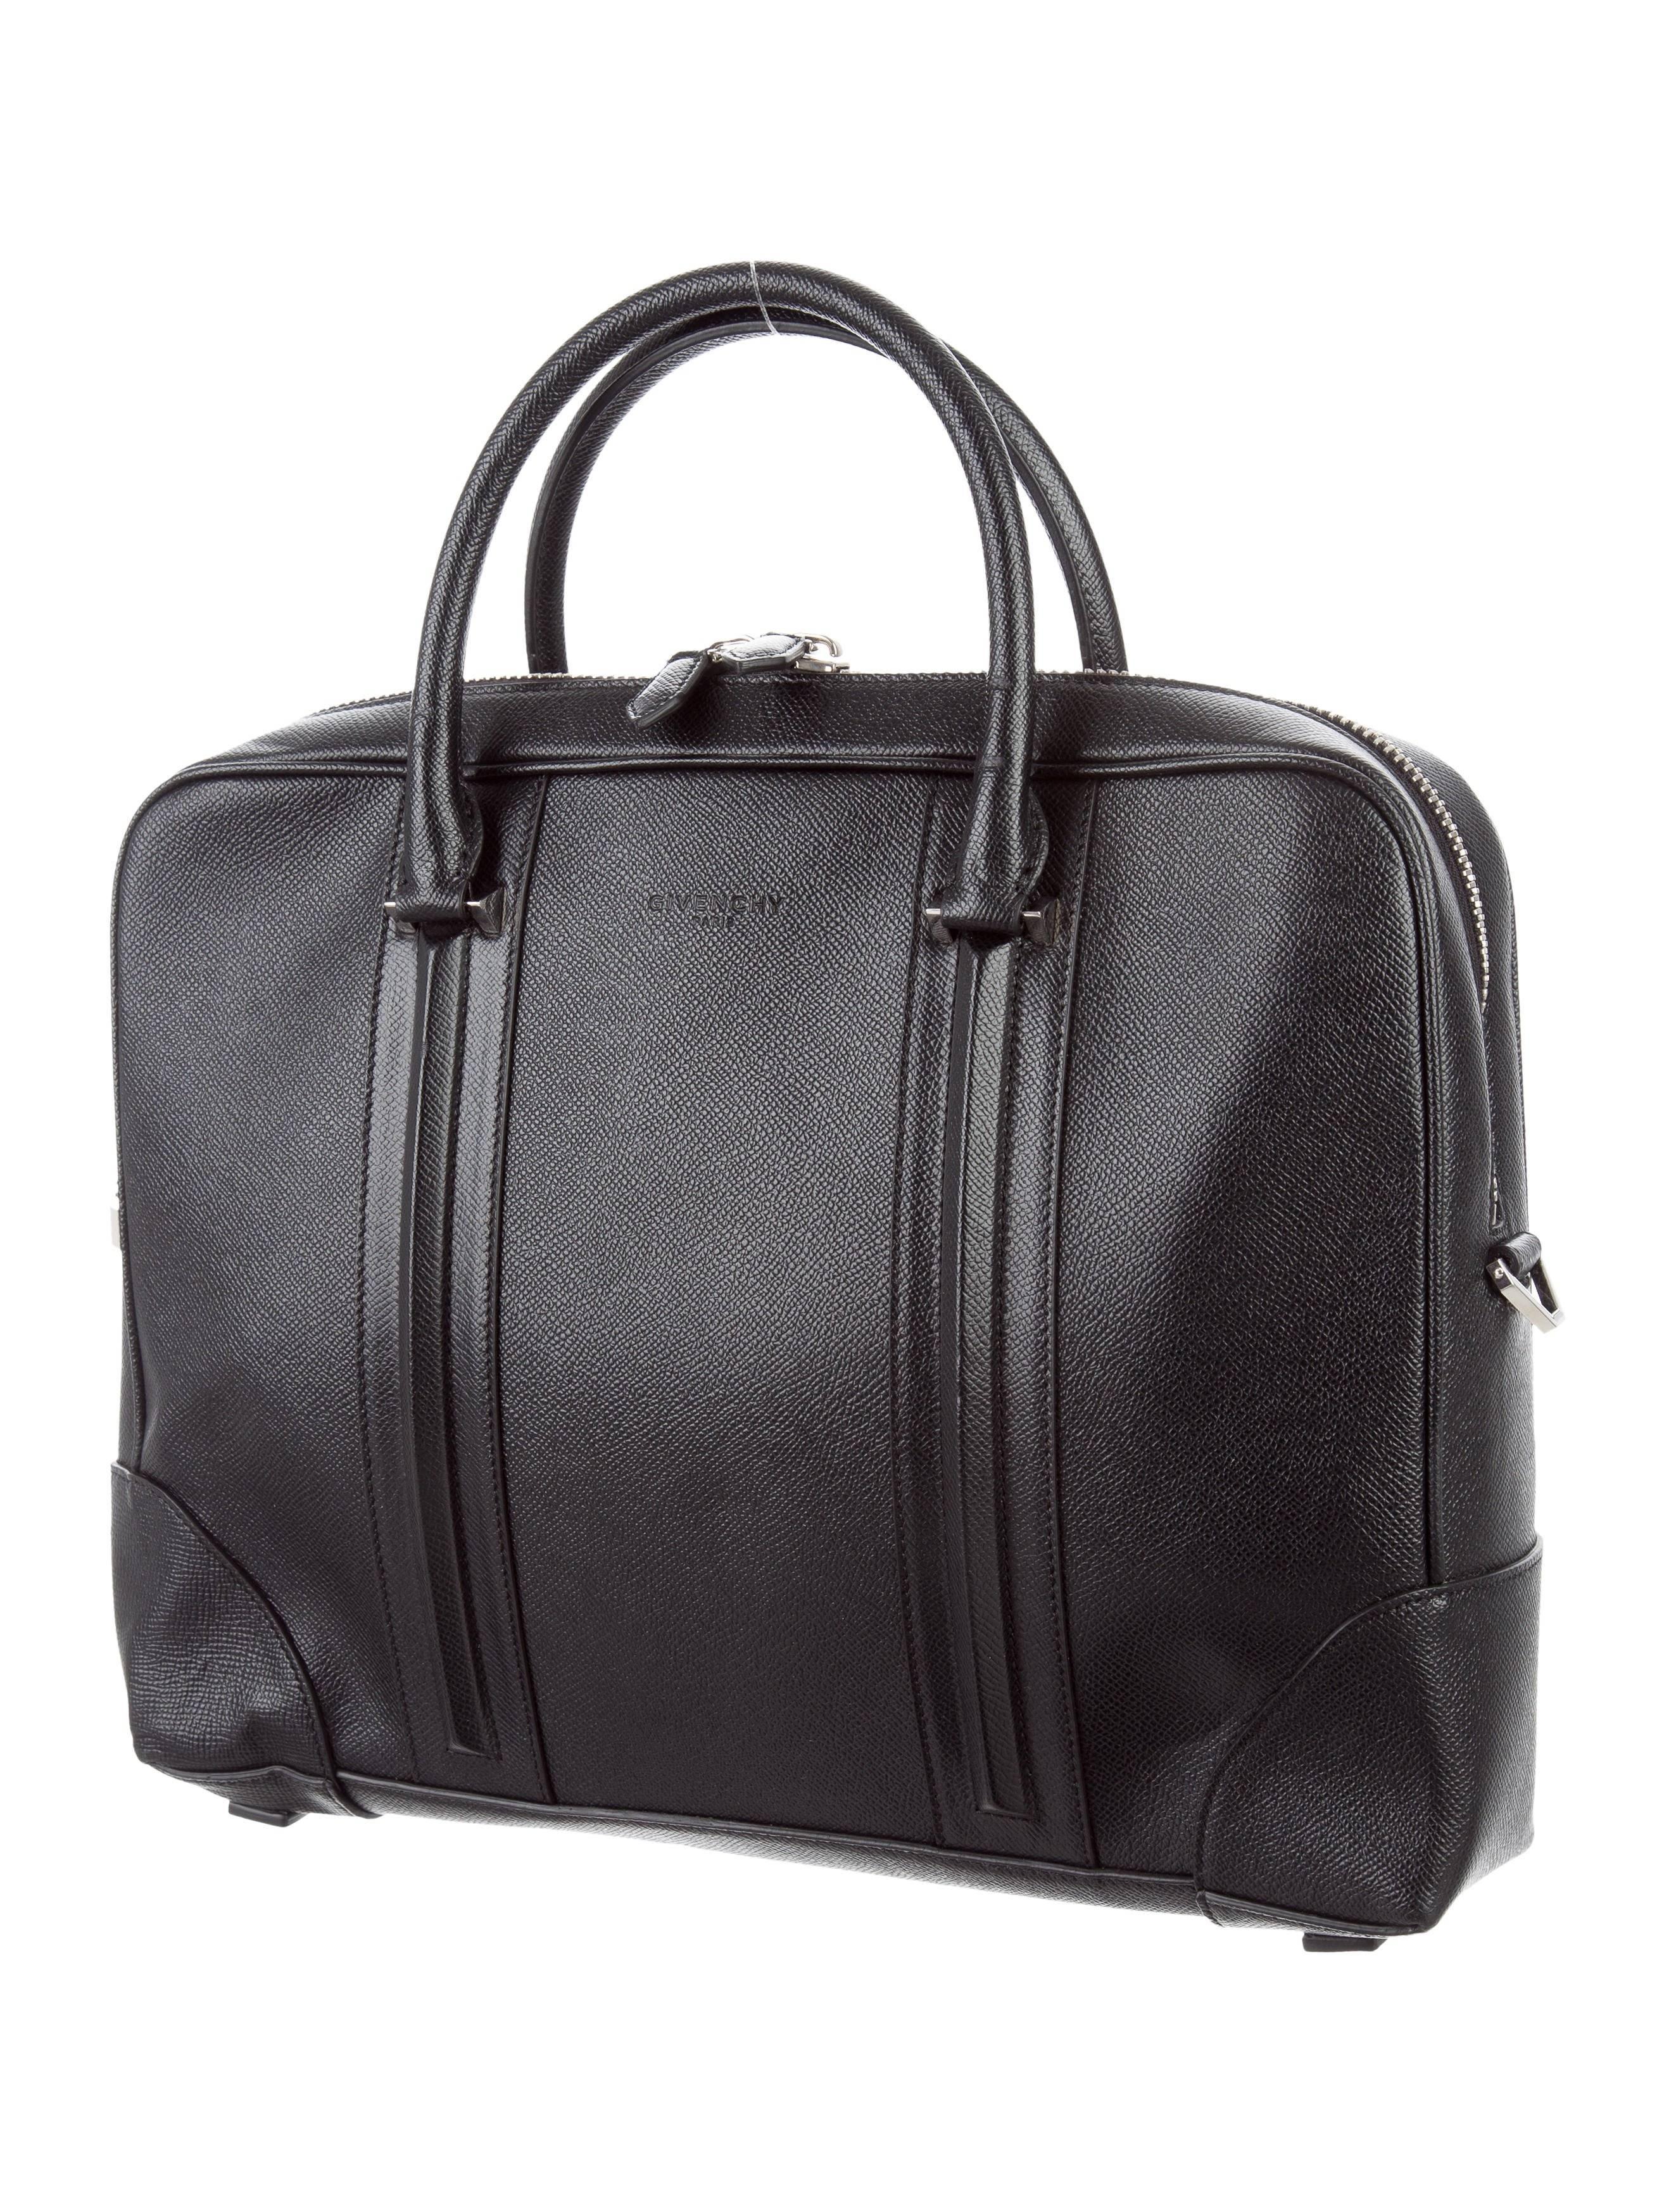 Givenchy New Black Leather Men's Business Travel Briefcase Tote Shoulder Bag

Leather
Silver tone hardware
Zipper closure
Woven lining
Made in Italy
Handle drop 3.5